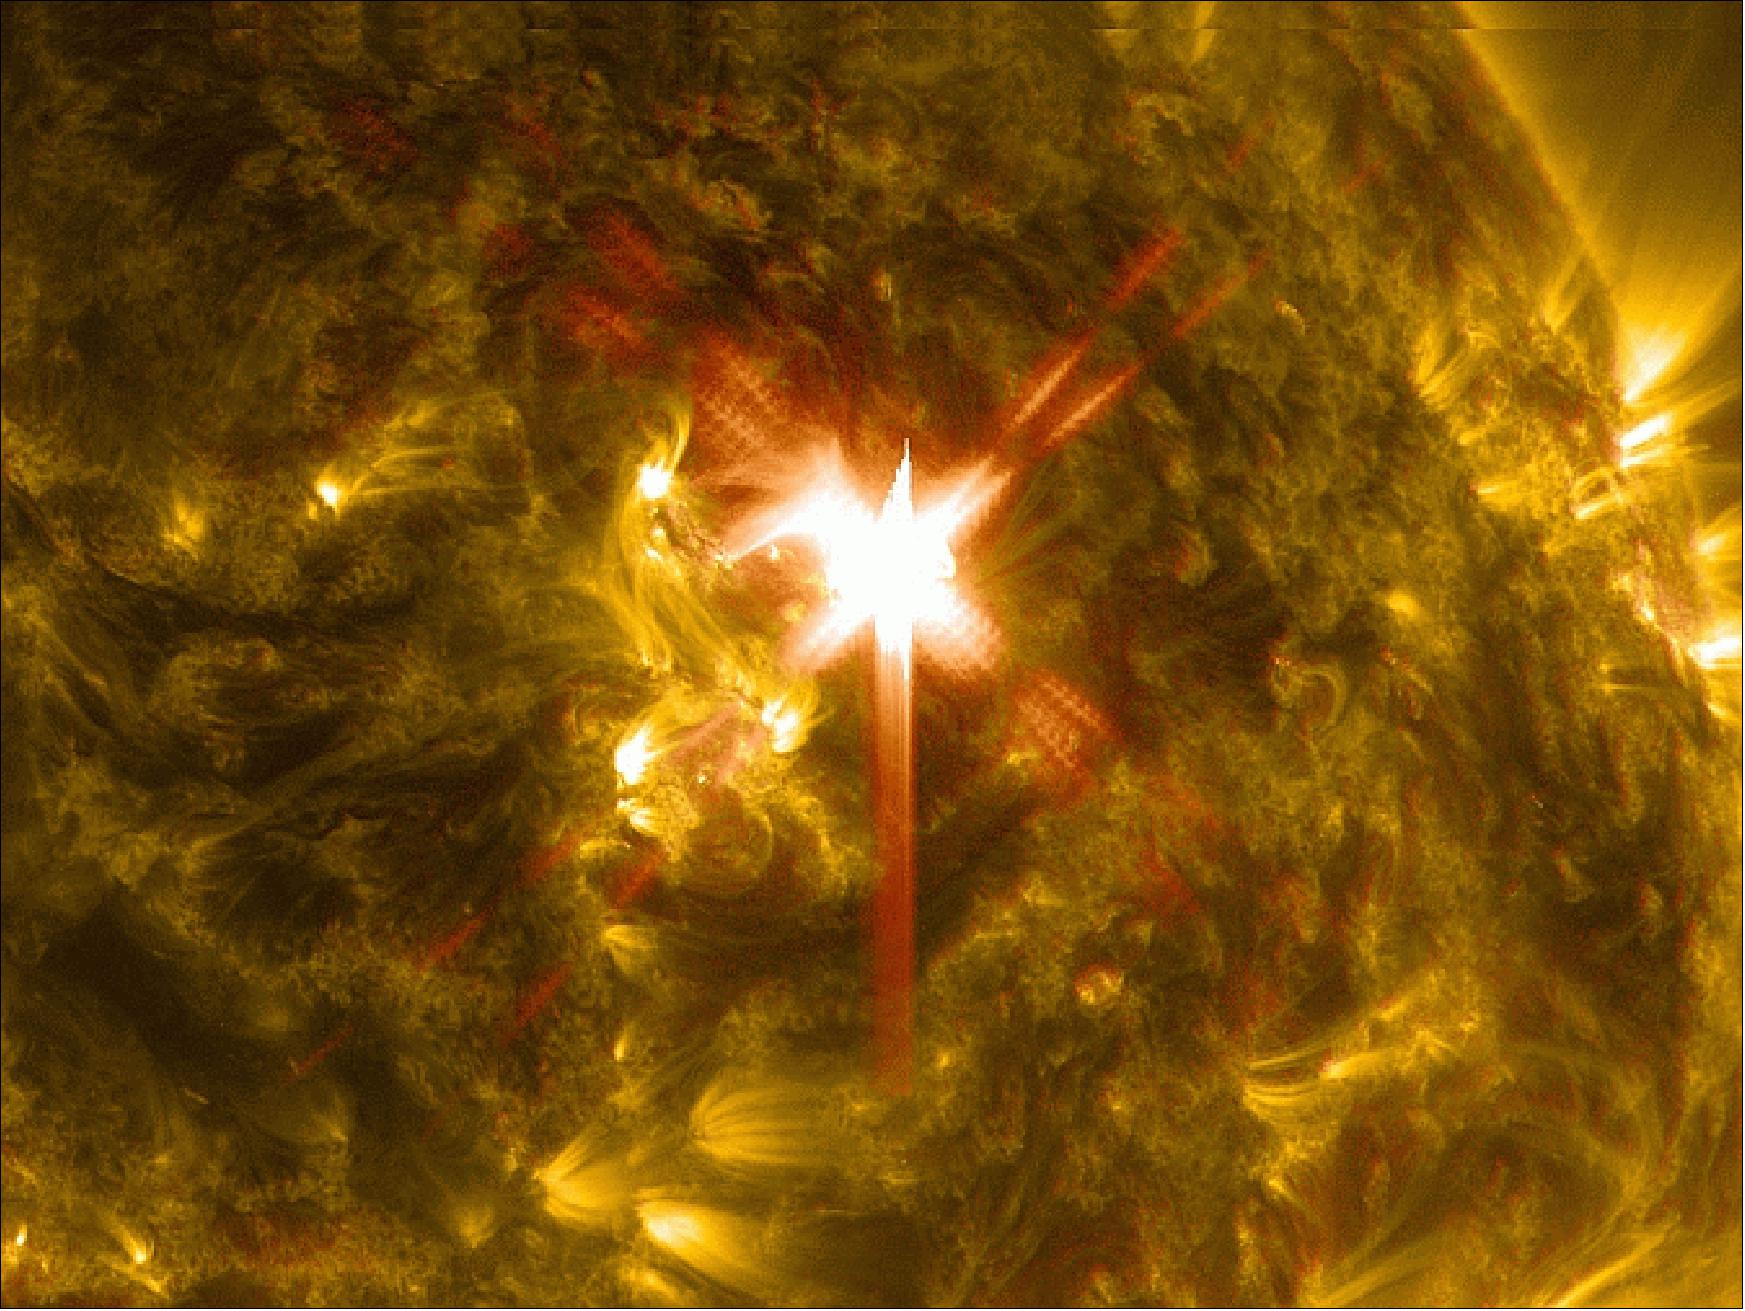 Figure 26: EUV radiation streams out of an X-class solar flare as seen in this image captured on March 29, 2014 by the AIA instrument of SDO (image credit: NASA, Ref. 32)